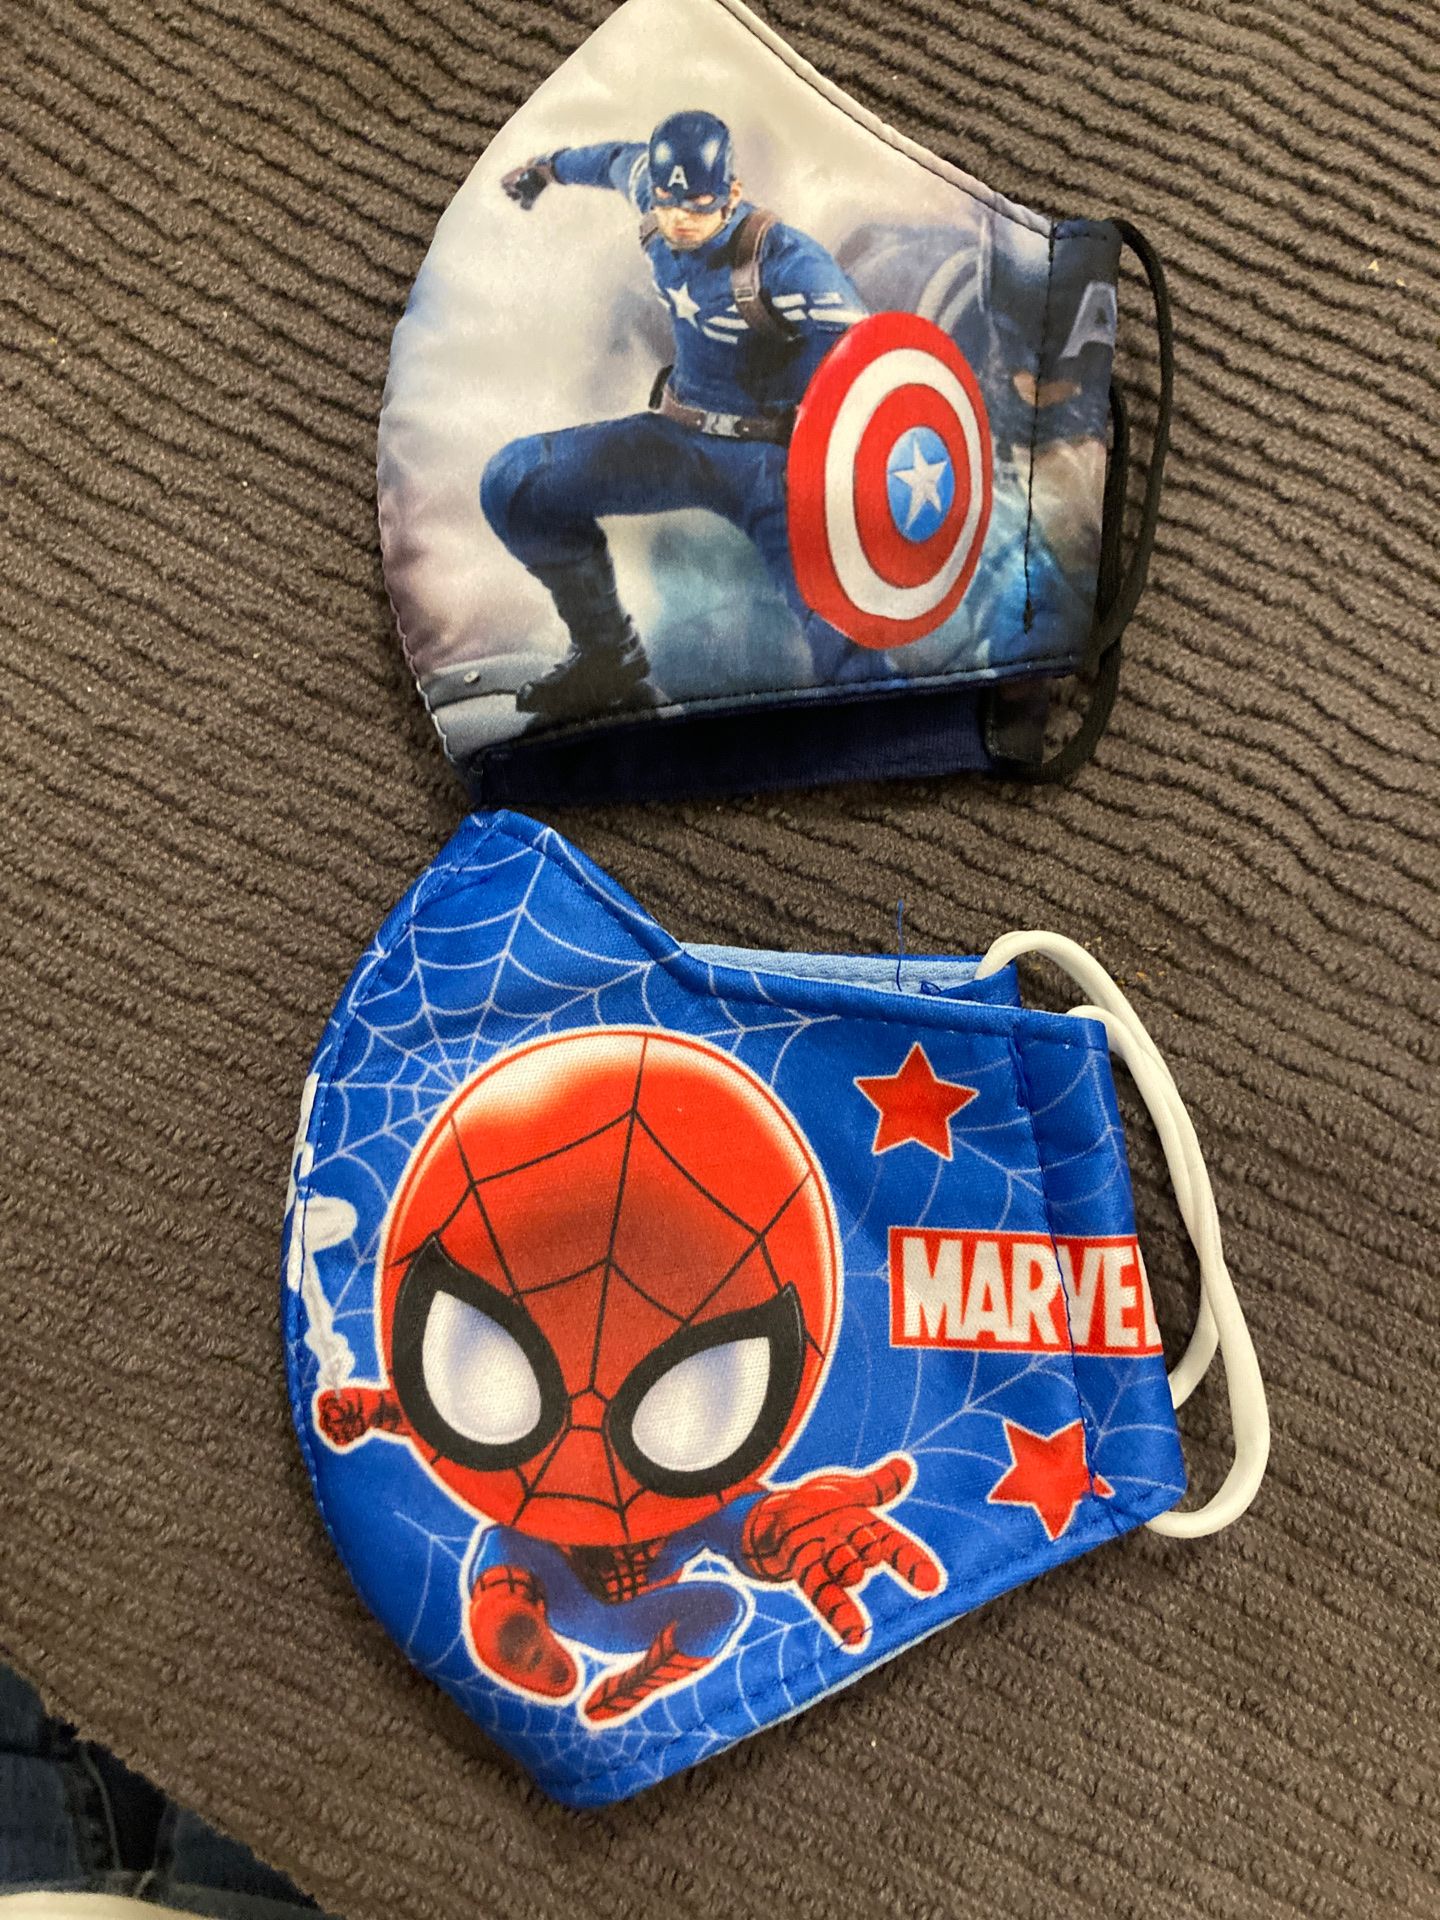 Facemask Bundle for kids $12 for both